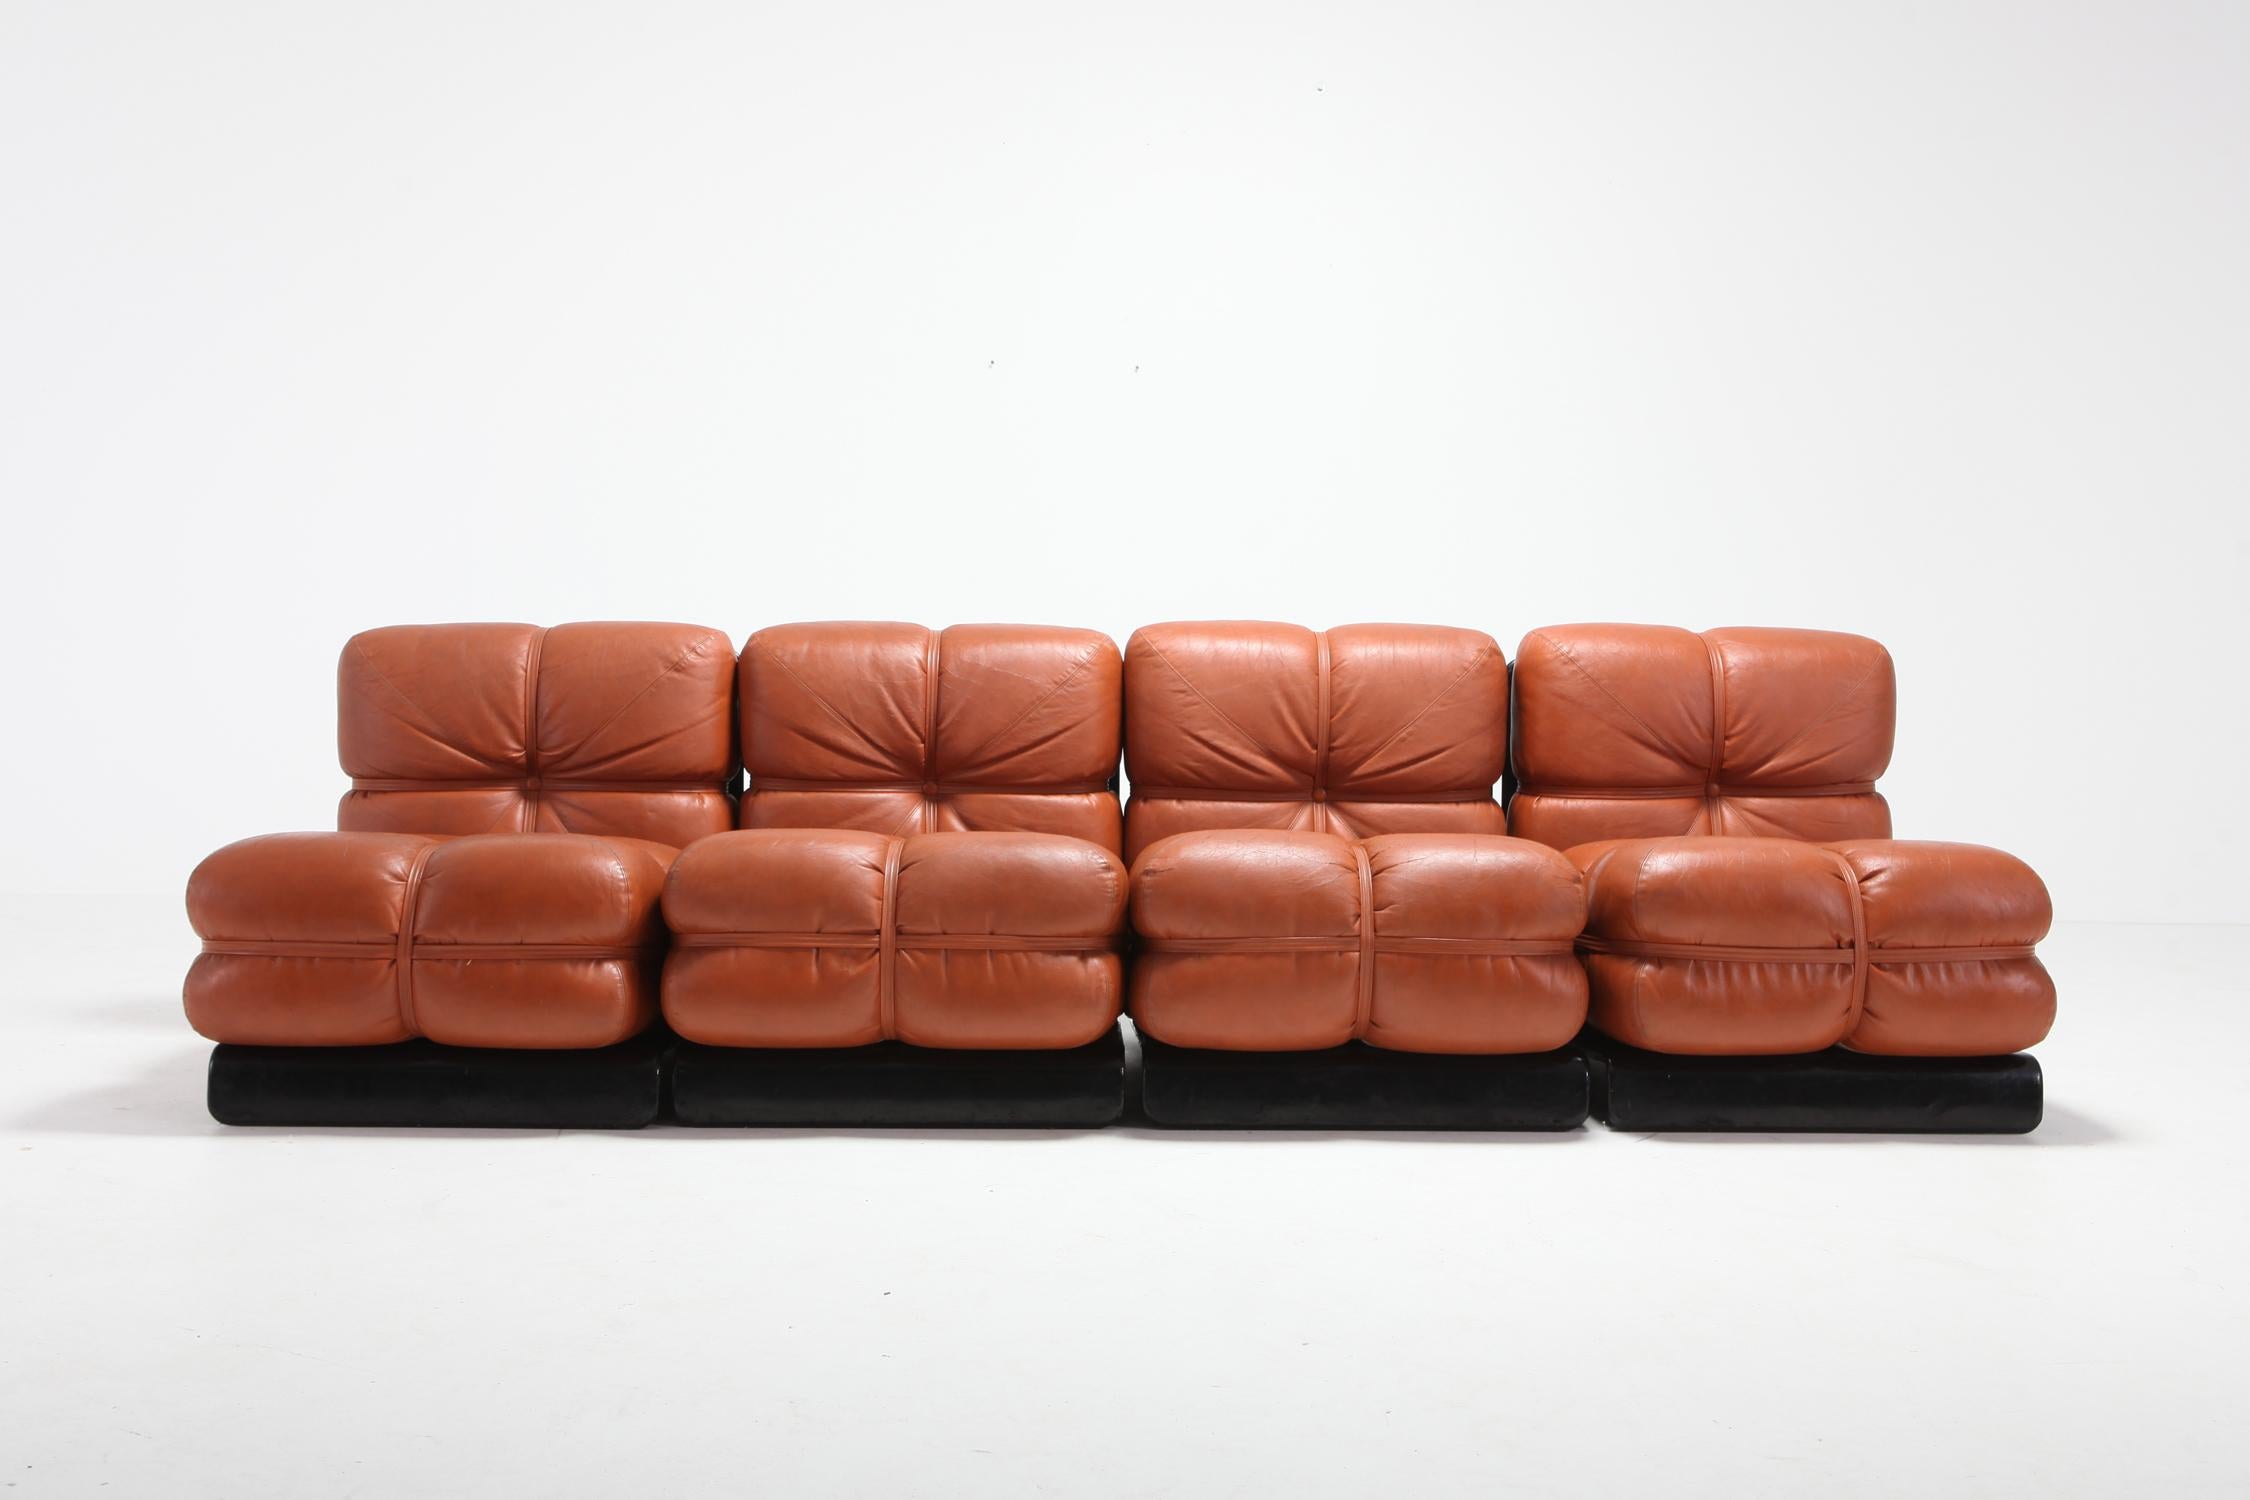 Cognac leather sectional sofa with black lacquered wooden frame by Carla Venosta.
The piece consists out of 4 lounge chairs unattached to create a sofa.

Carla Venosta was a designer and decorator for the beau monde in the 1980s.


 